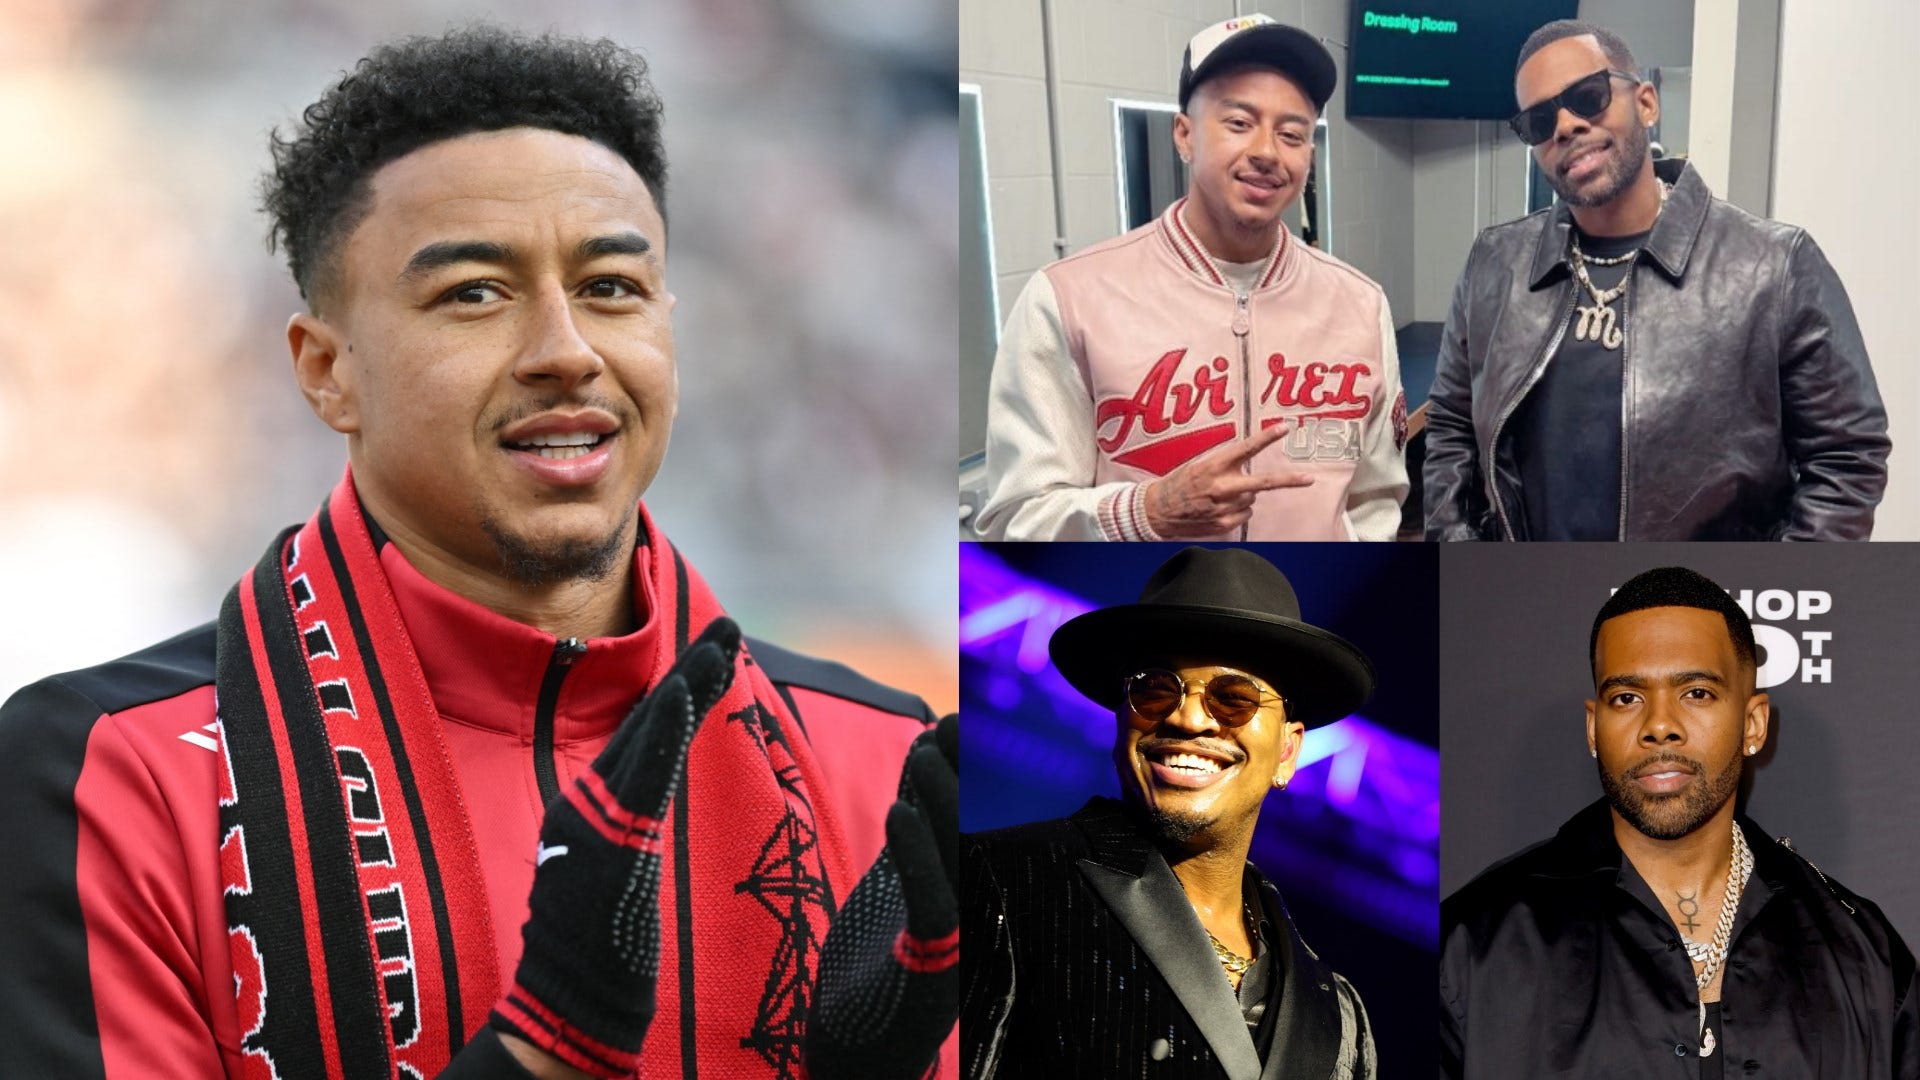 Ex-Man Utd star Jesse Lingard meets legendary R&B duo Ne-Yo & Mario after travelling to huge concert in lavish limo - just days after stinging criticism from FC Seoul manager